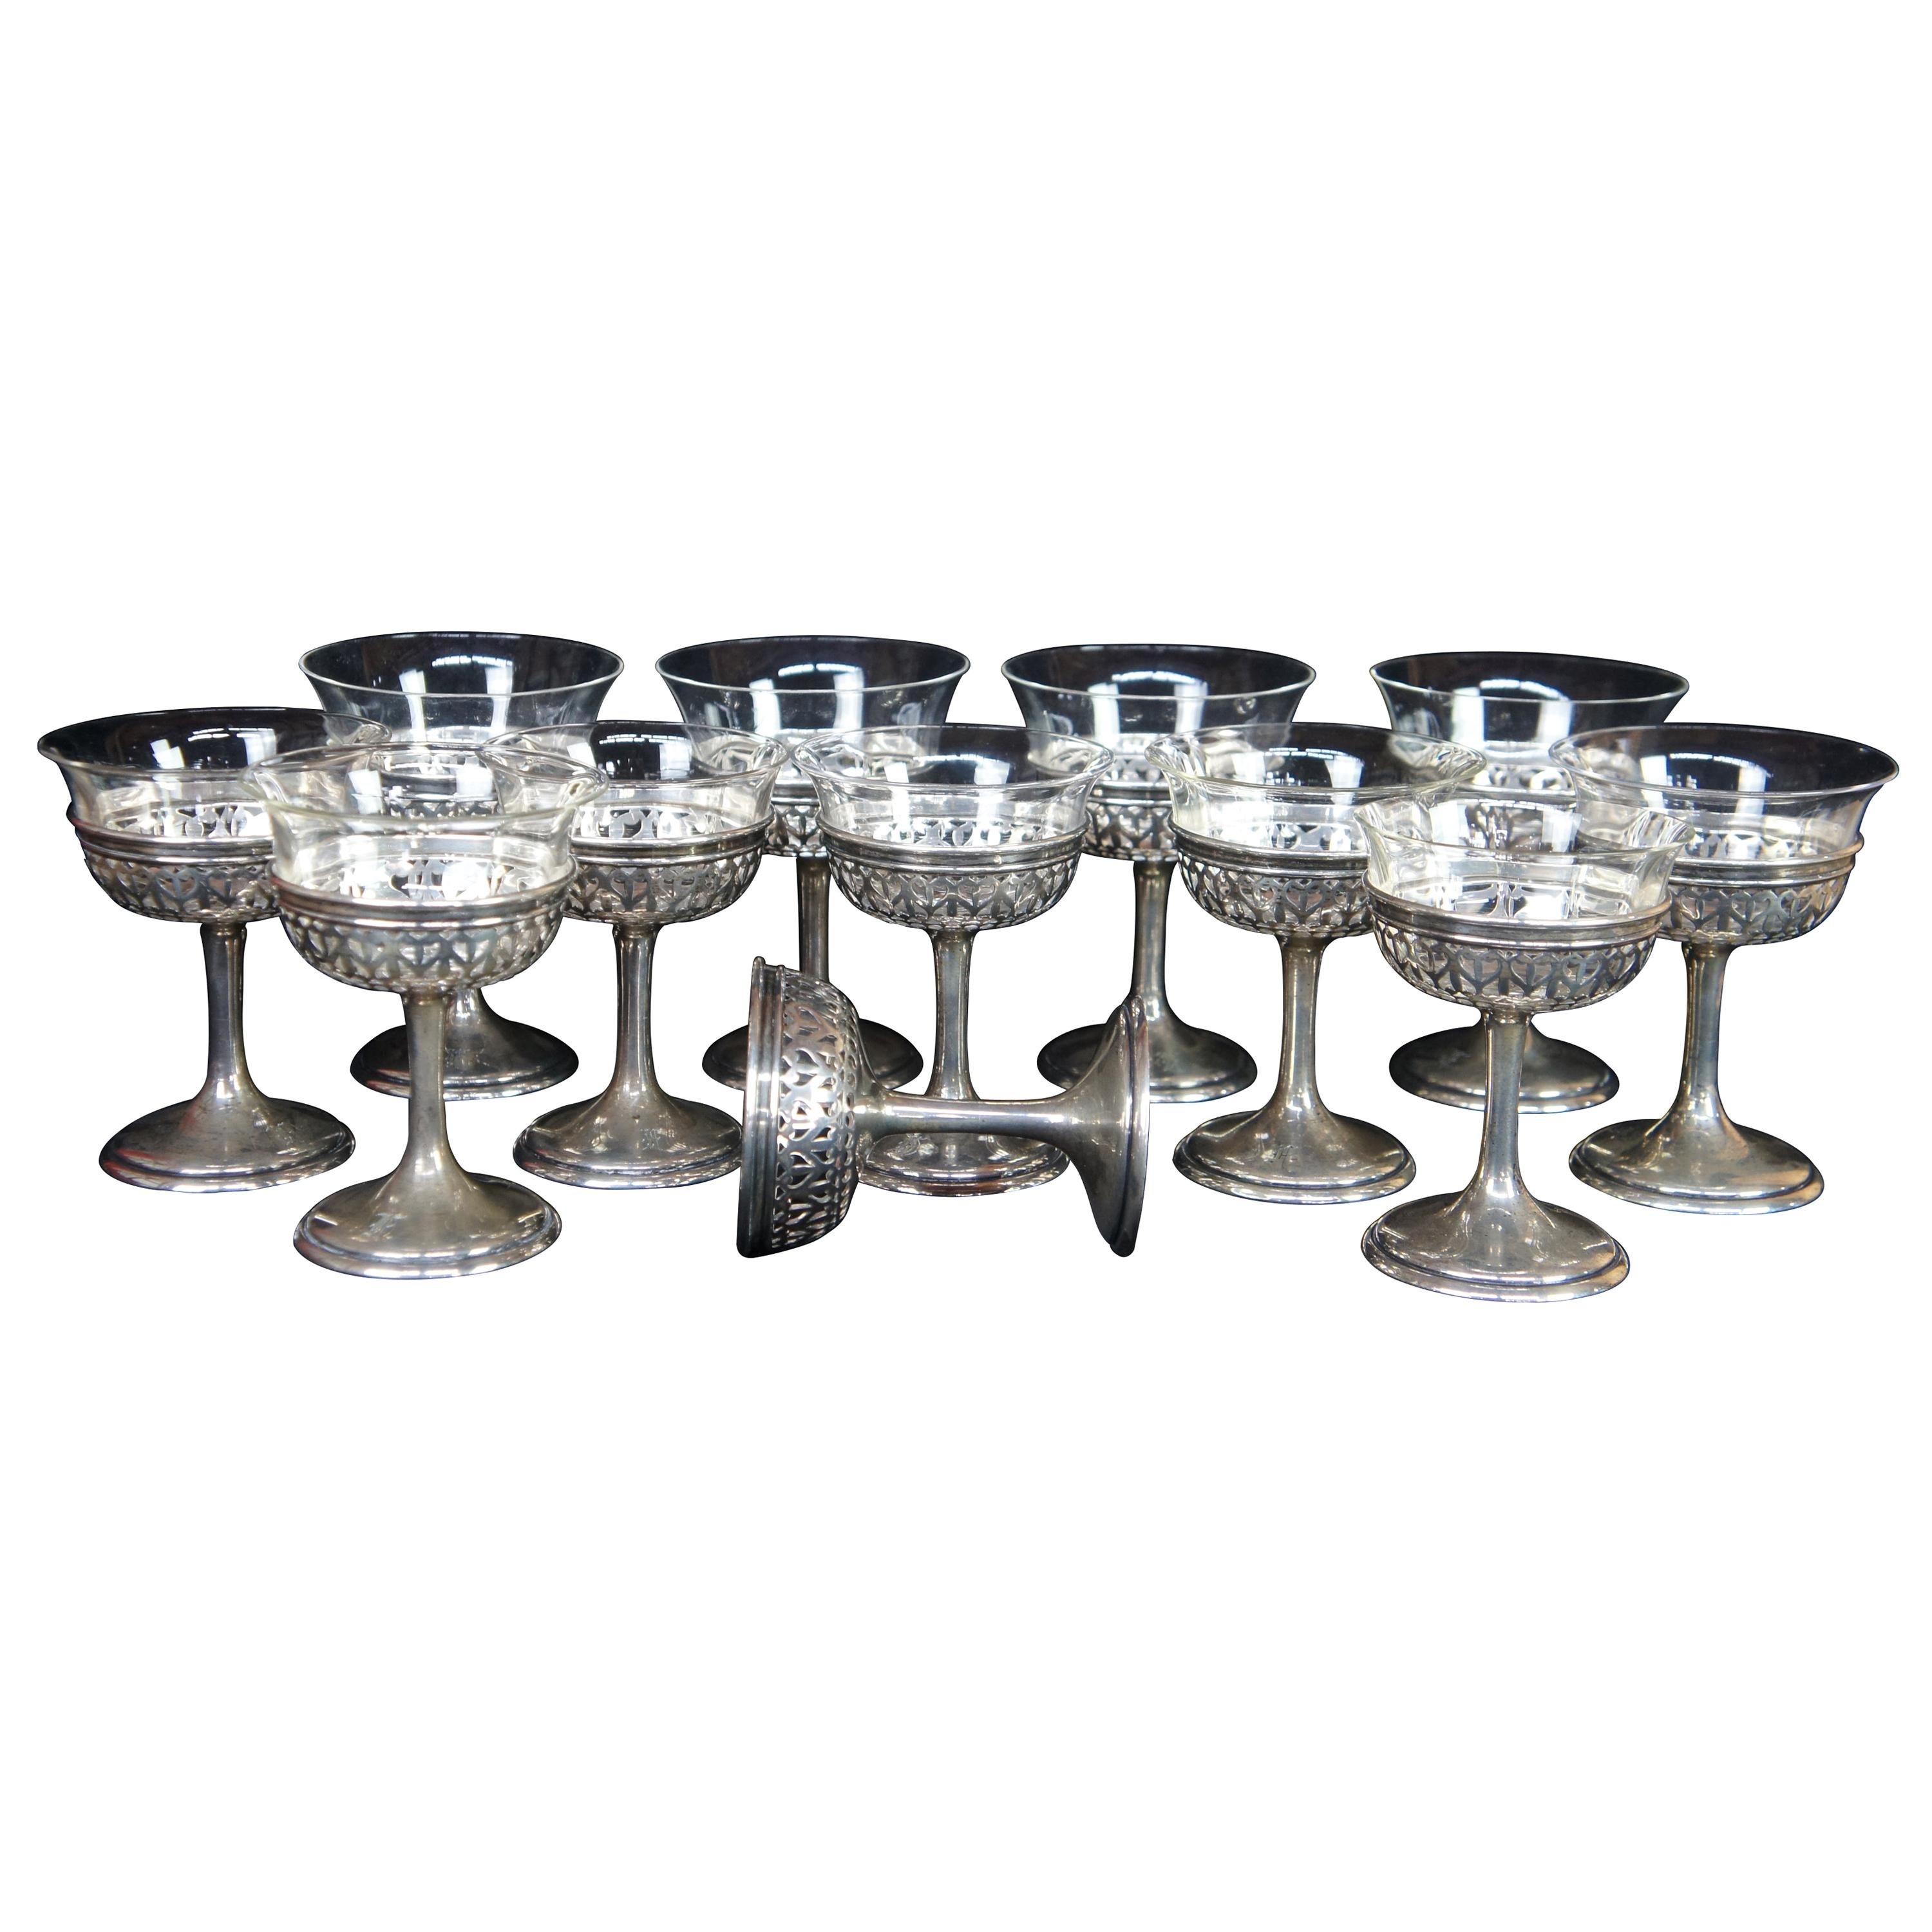 12 Antique Gorham Reticulated Sterling Silver Dessert Aperitif Cordial Glasses For Sale